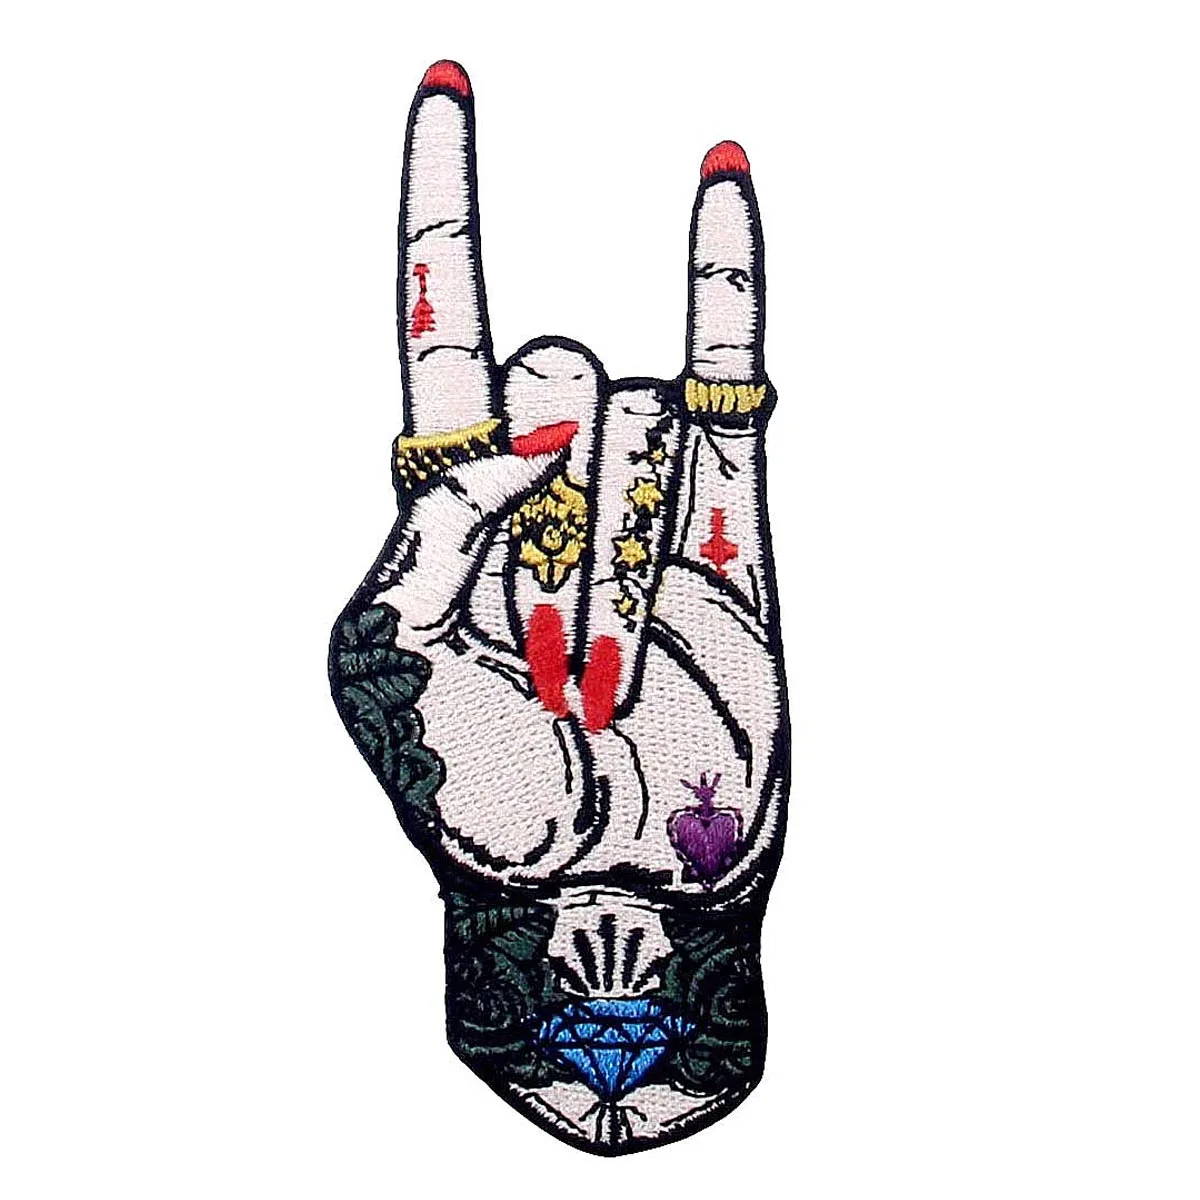 Rock and Roll hand Sign Music Biker Iron Sew on Embroidered Patch 